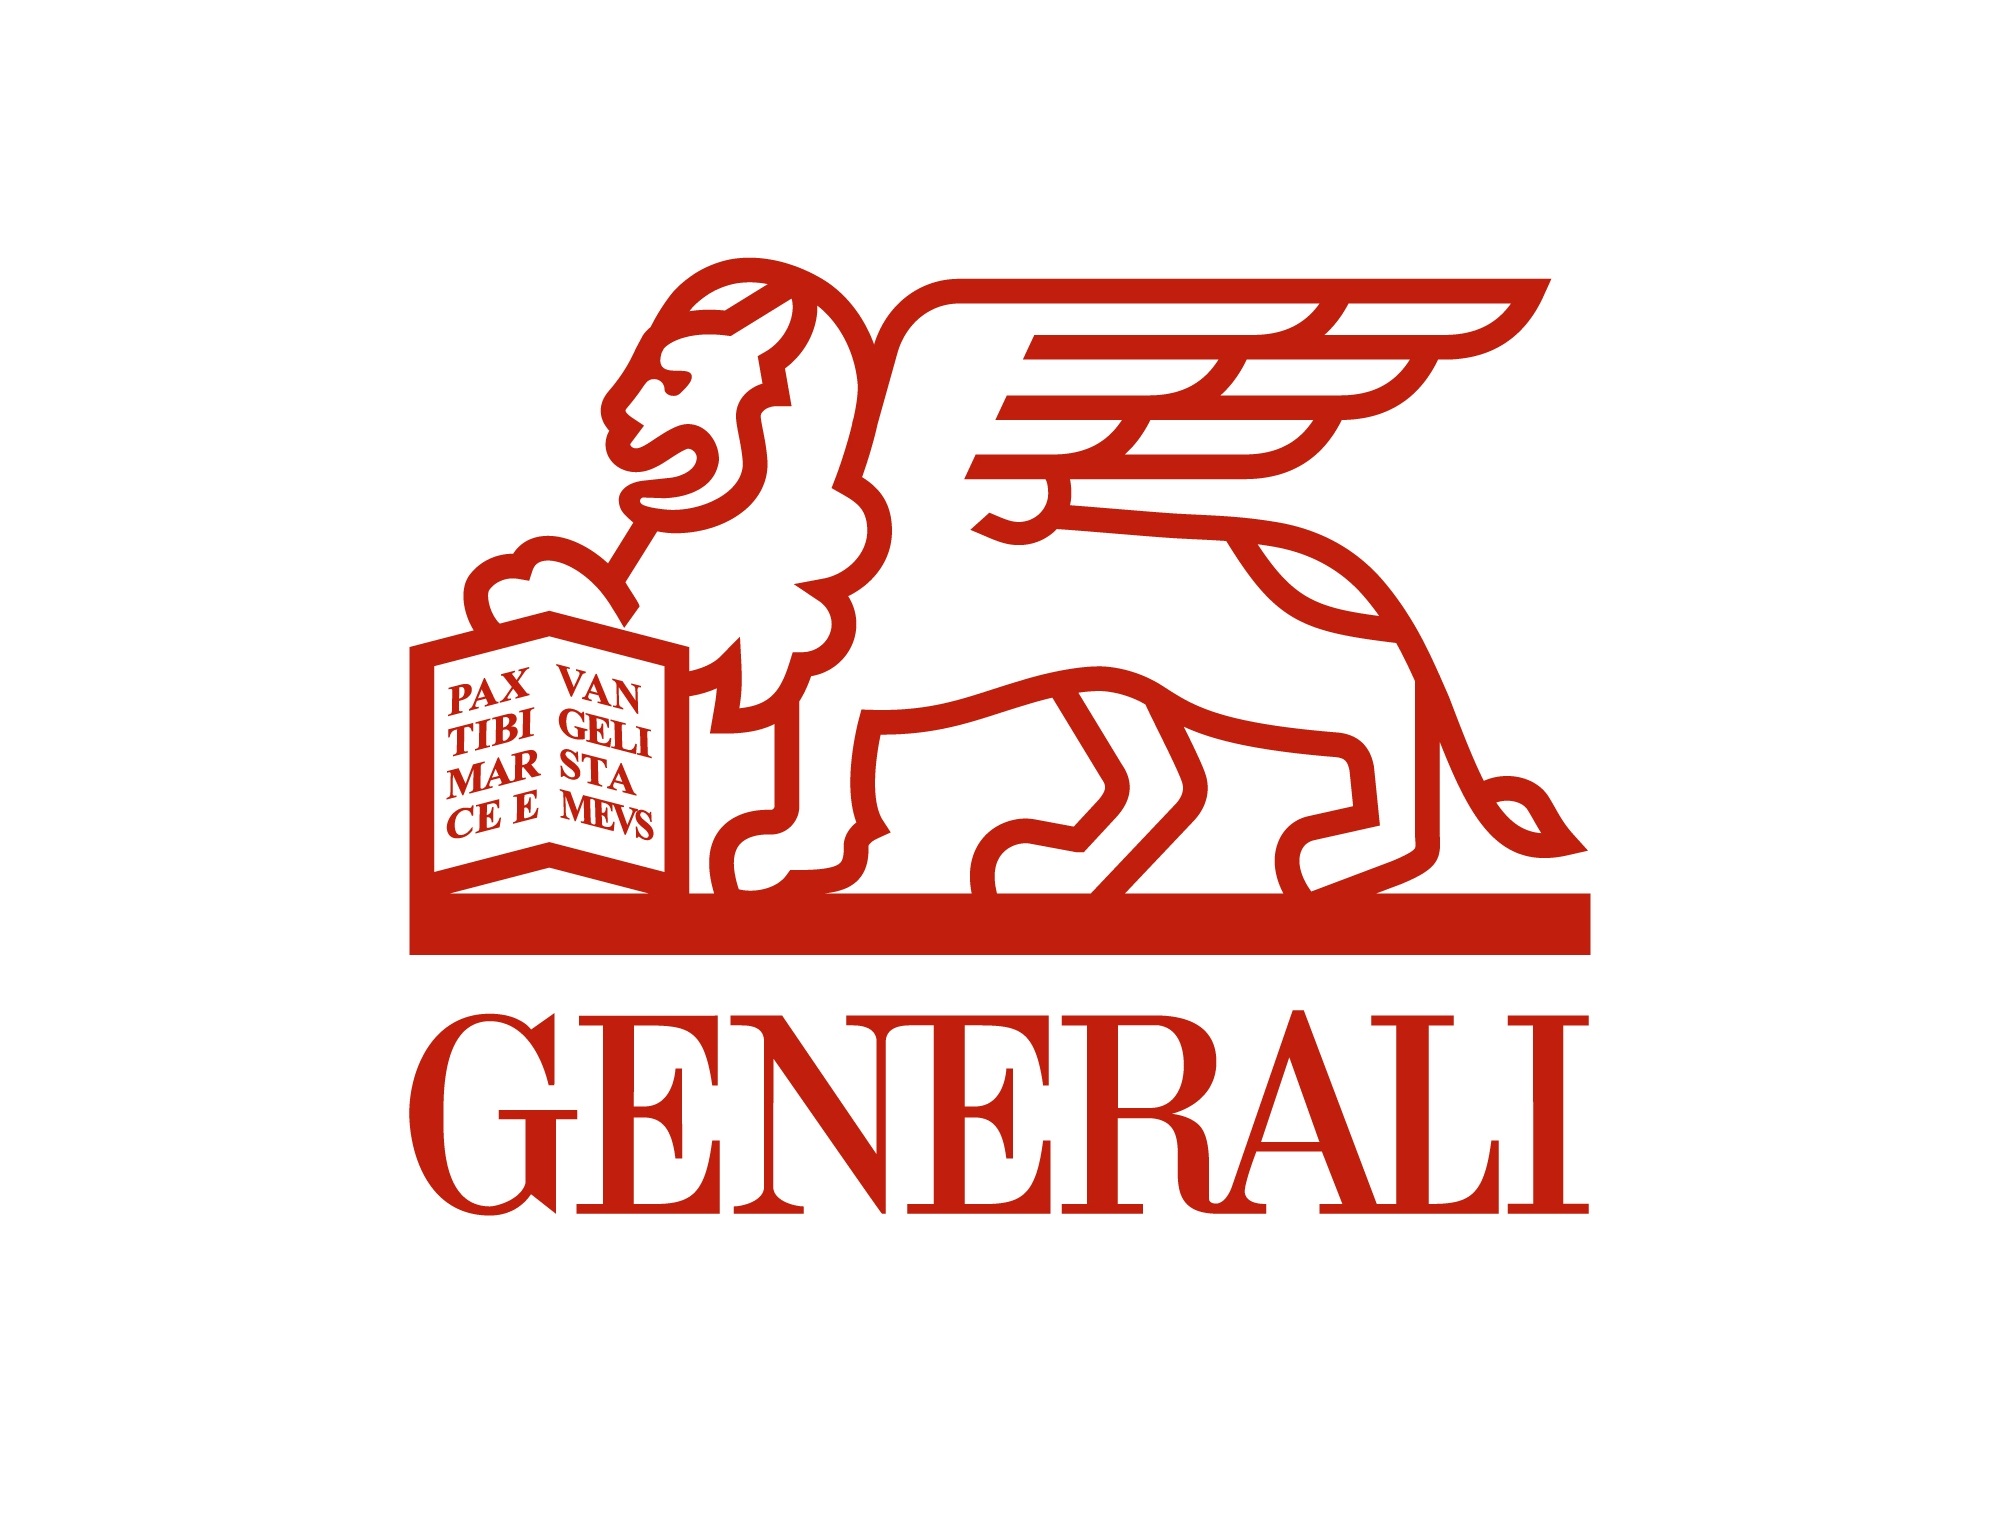 19-facts-about-generali-group